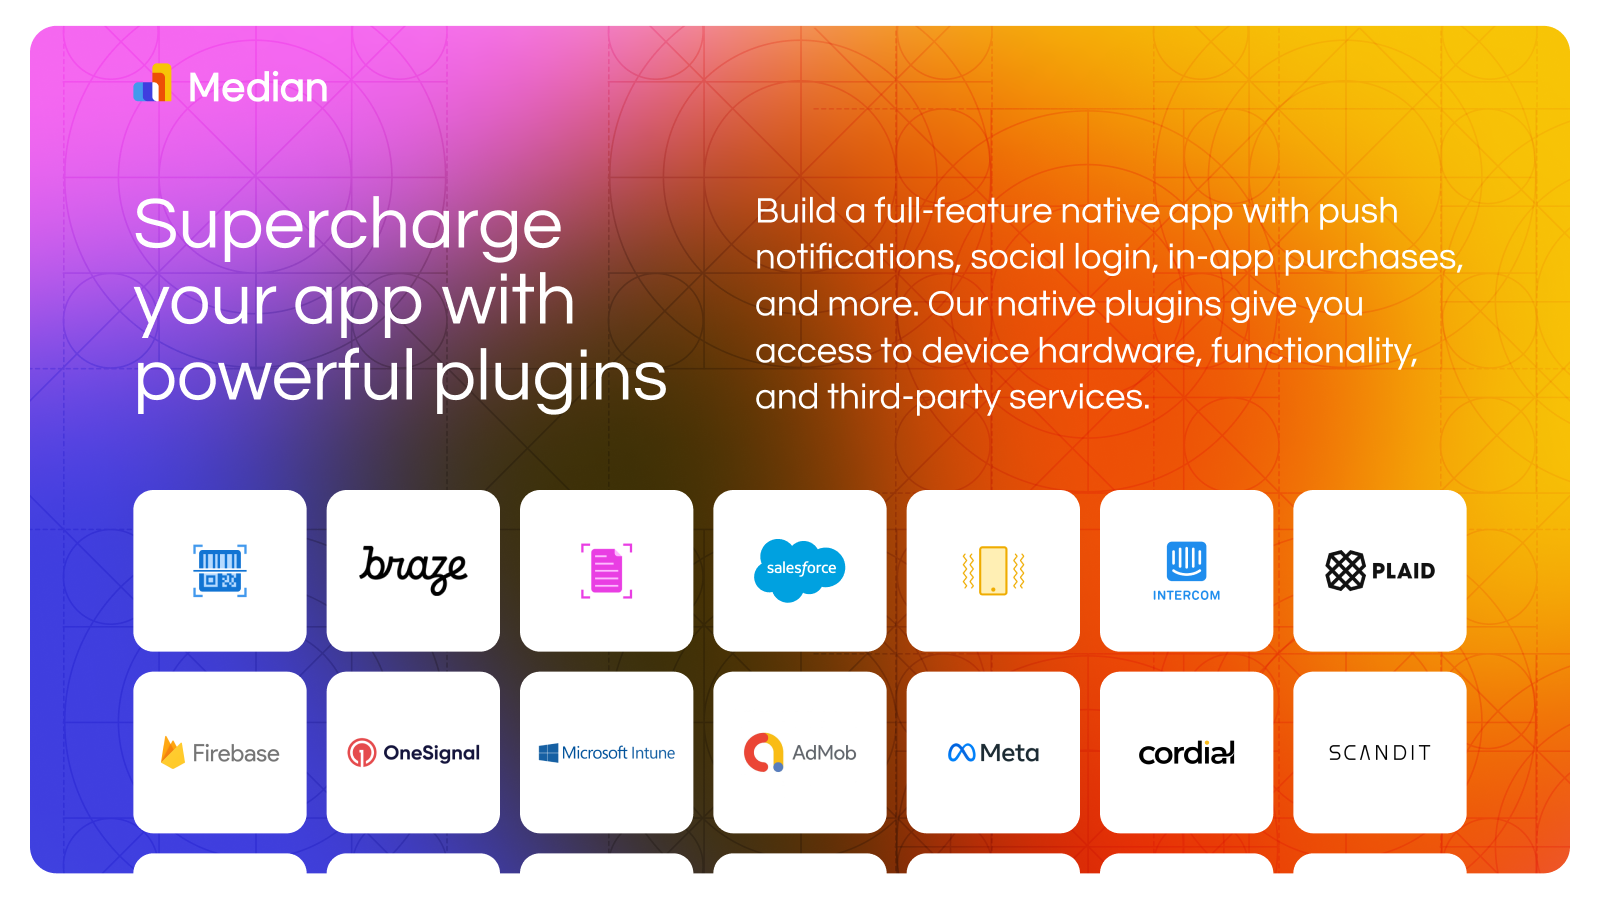 Supercharge your app with powerful plugins